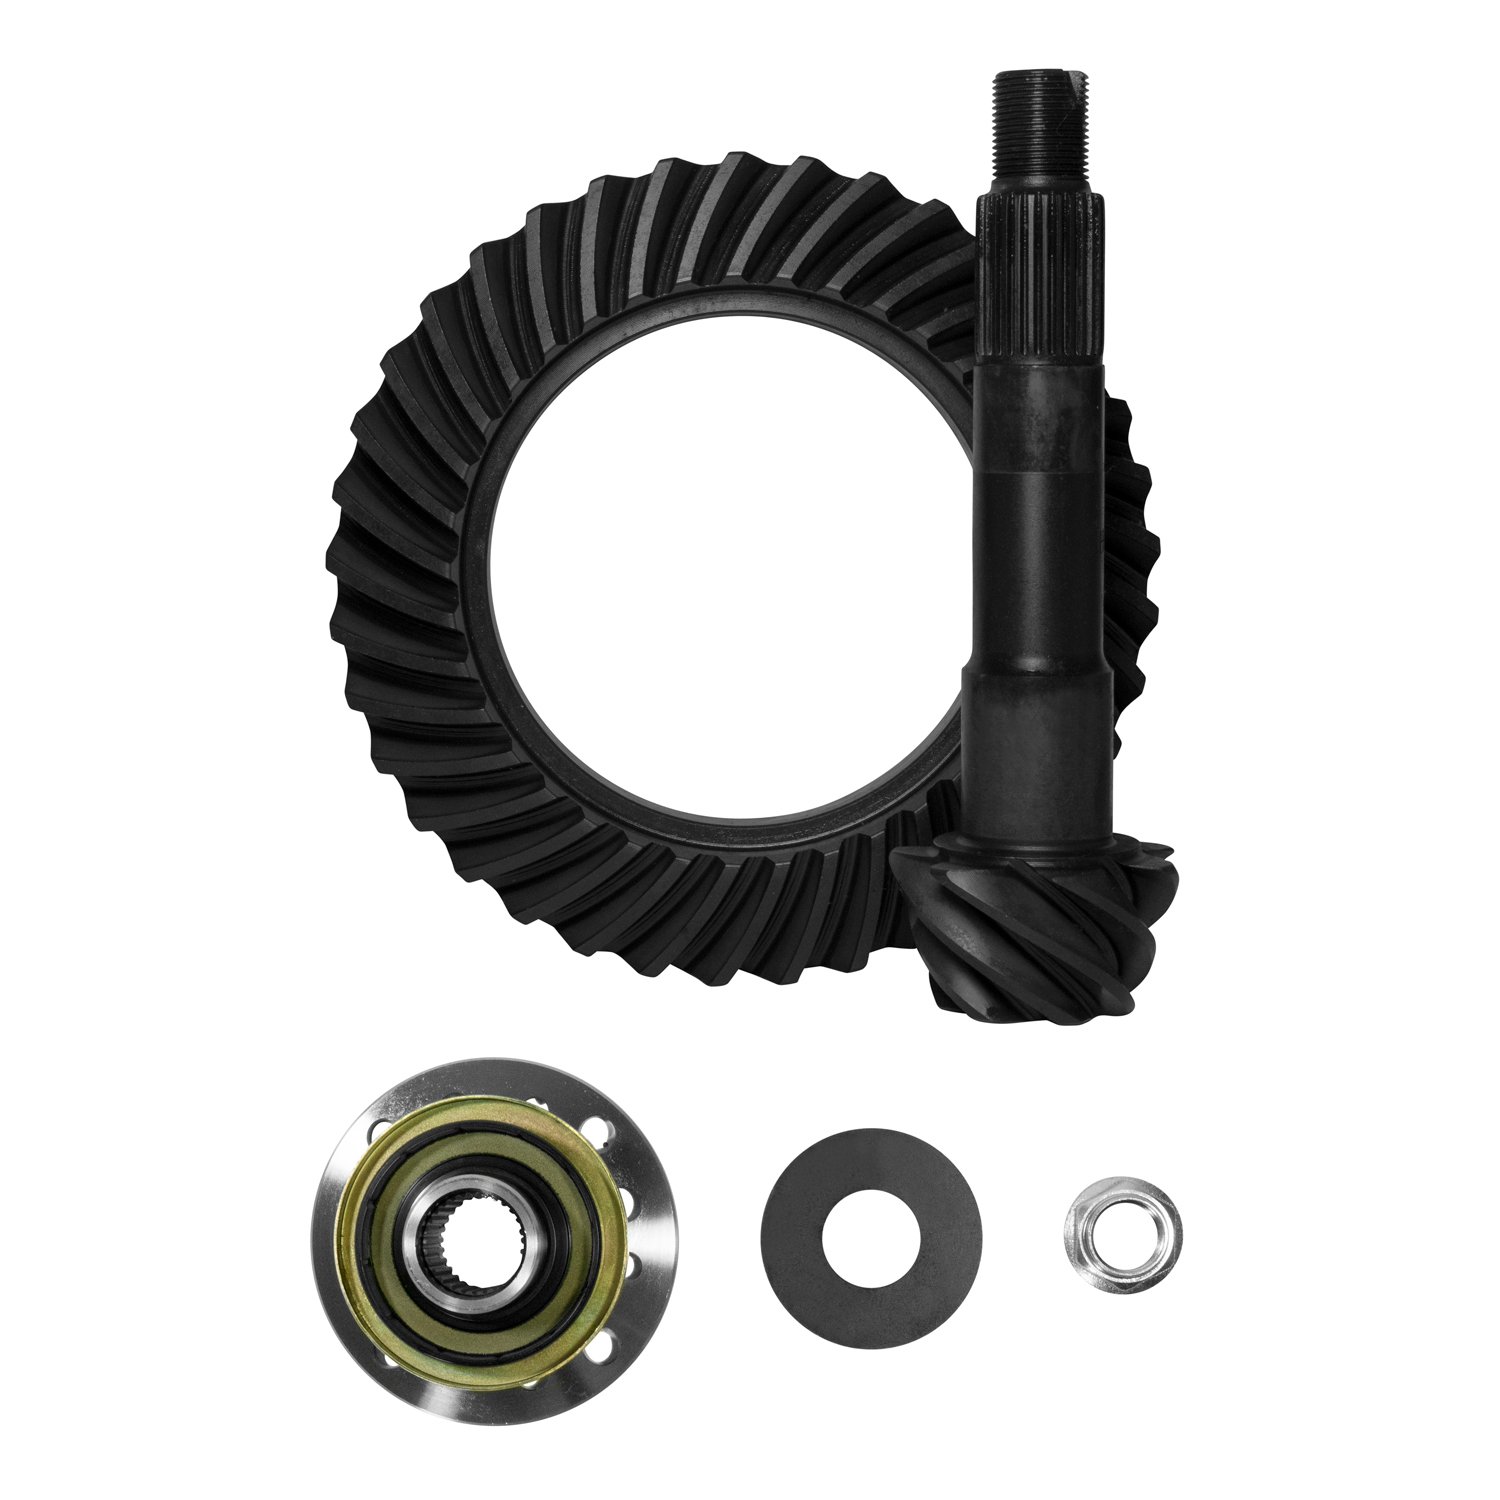 USA Standard ZG T8-411K Ring & Pinion Gear Set, For Toyota 8 in., 4.11 Ratio